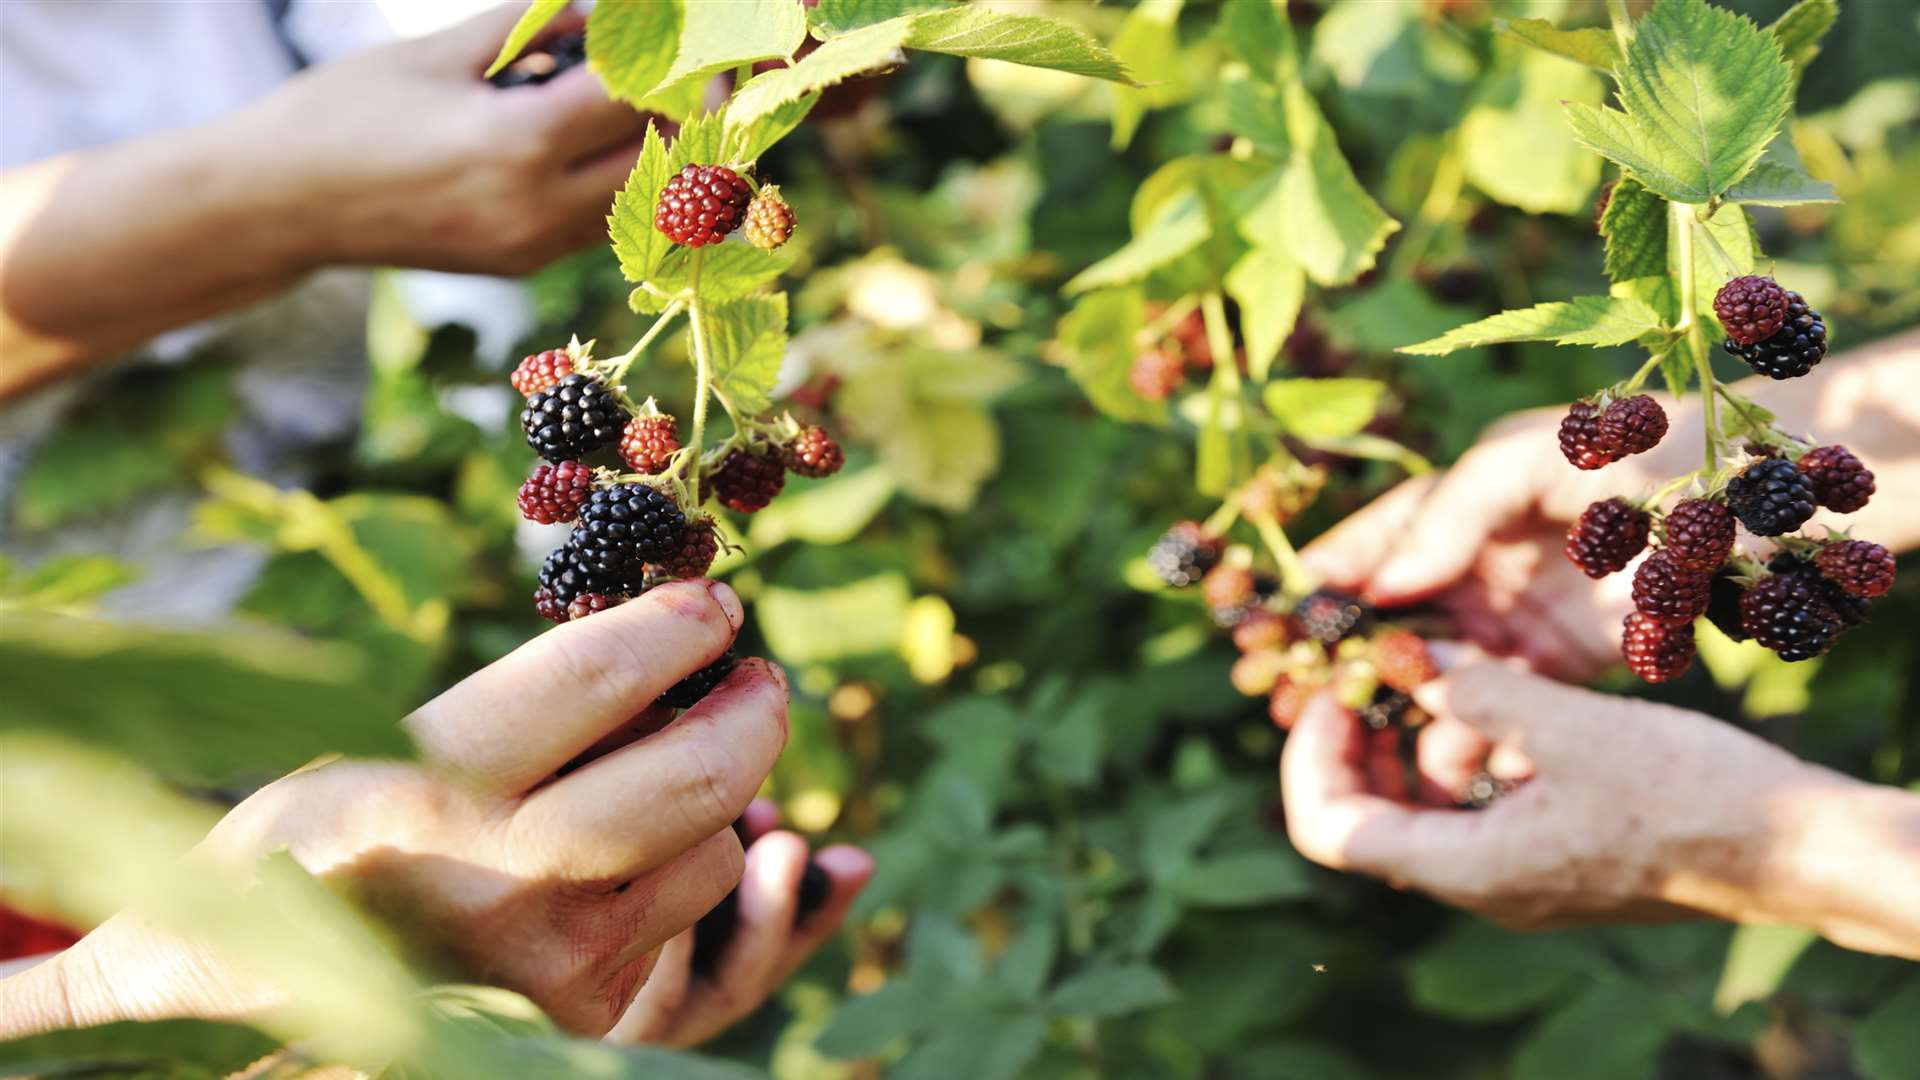 Berry picking was one of Caroline's earliest experiences of foraging in Kent